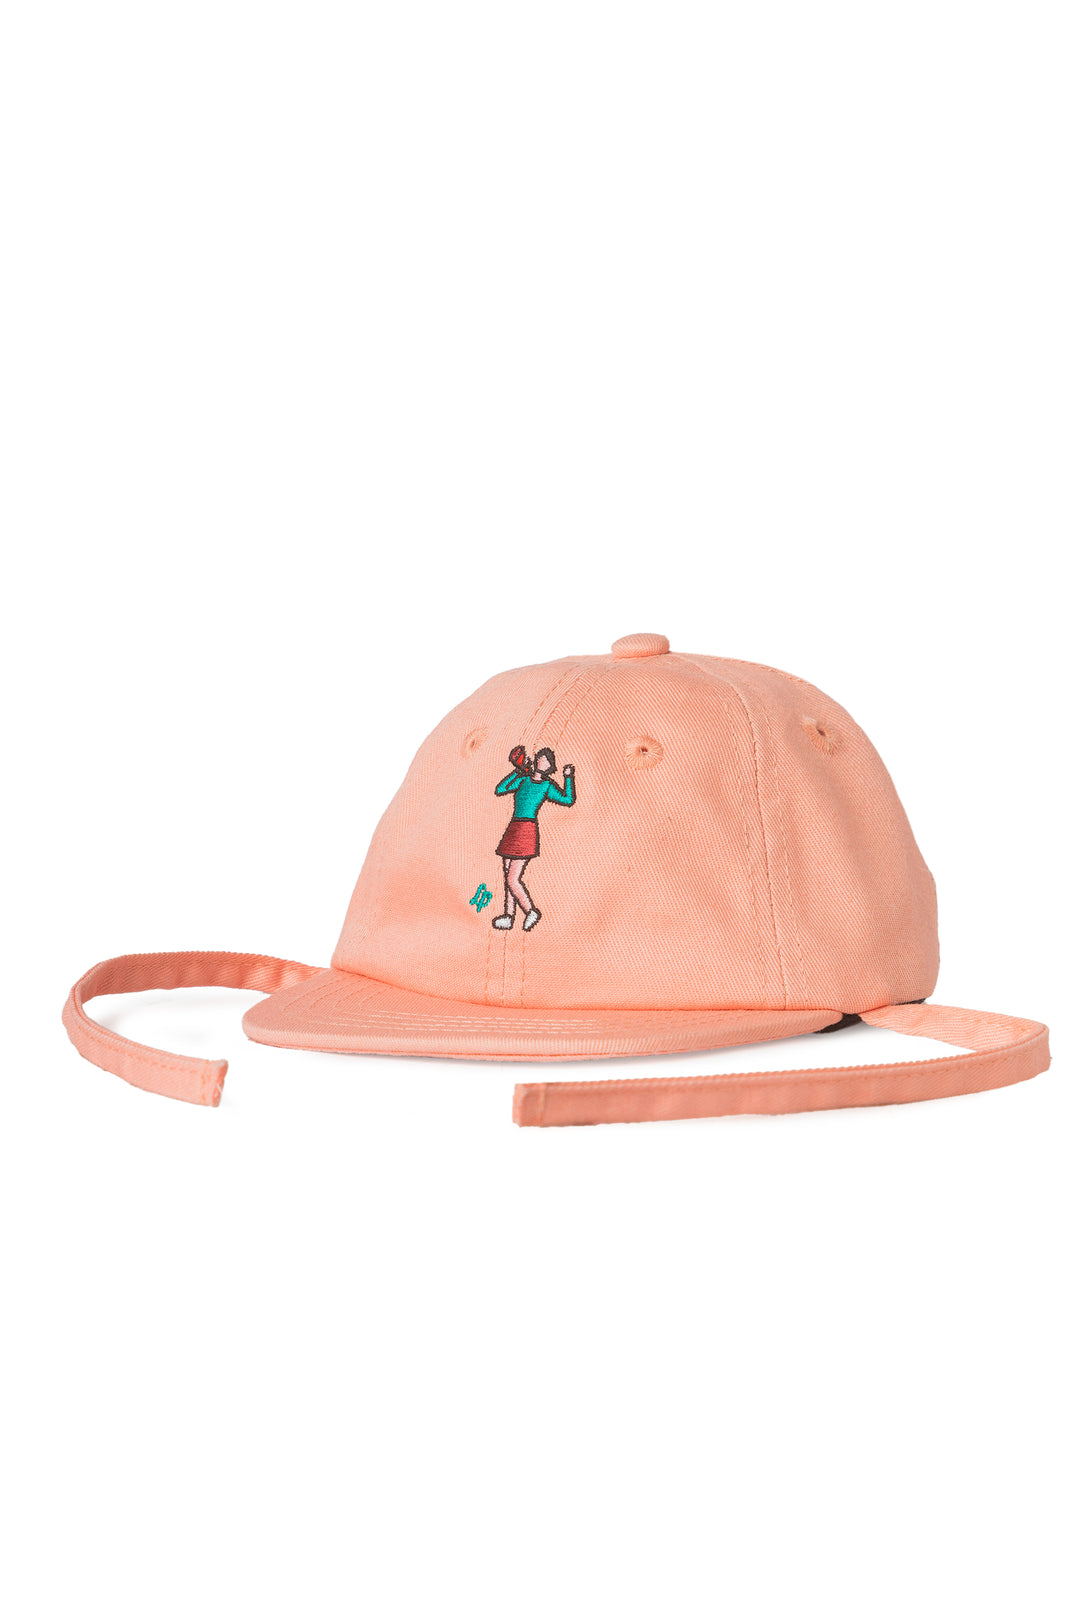 Cap - Fit Unstructured [Baby]